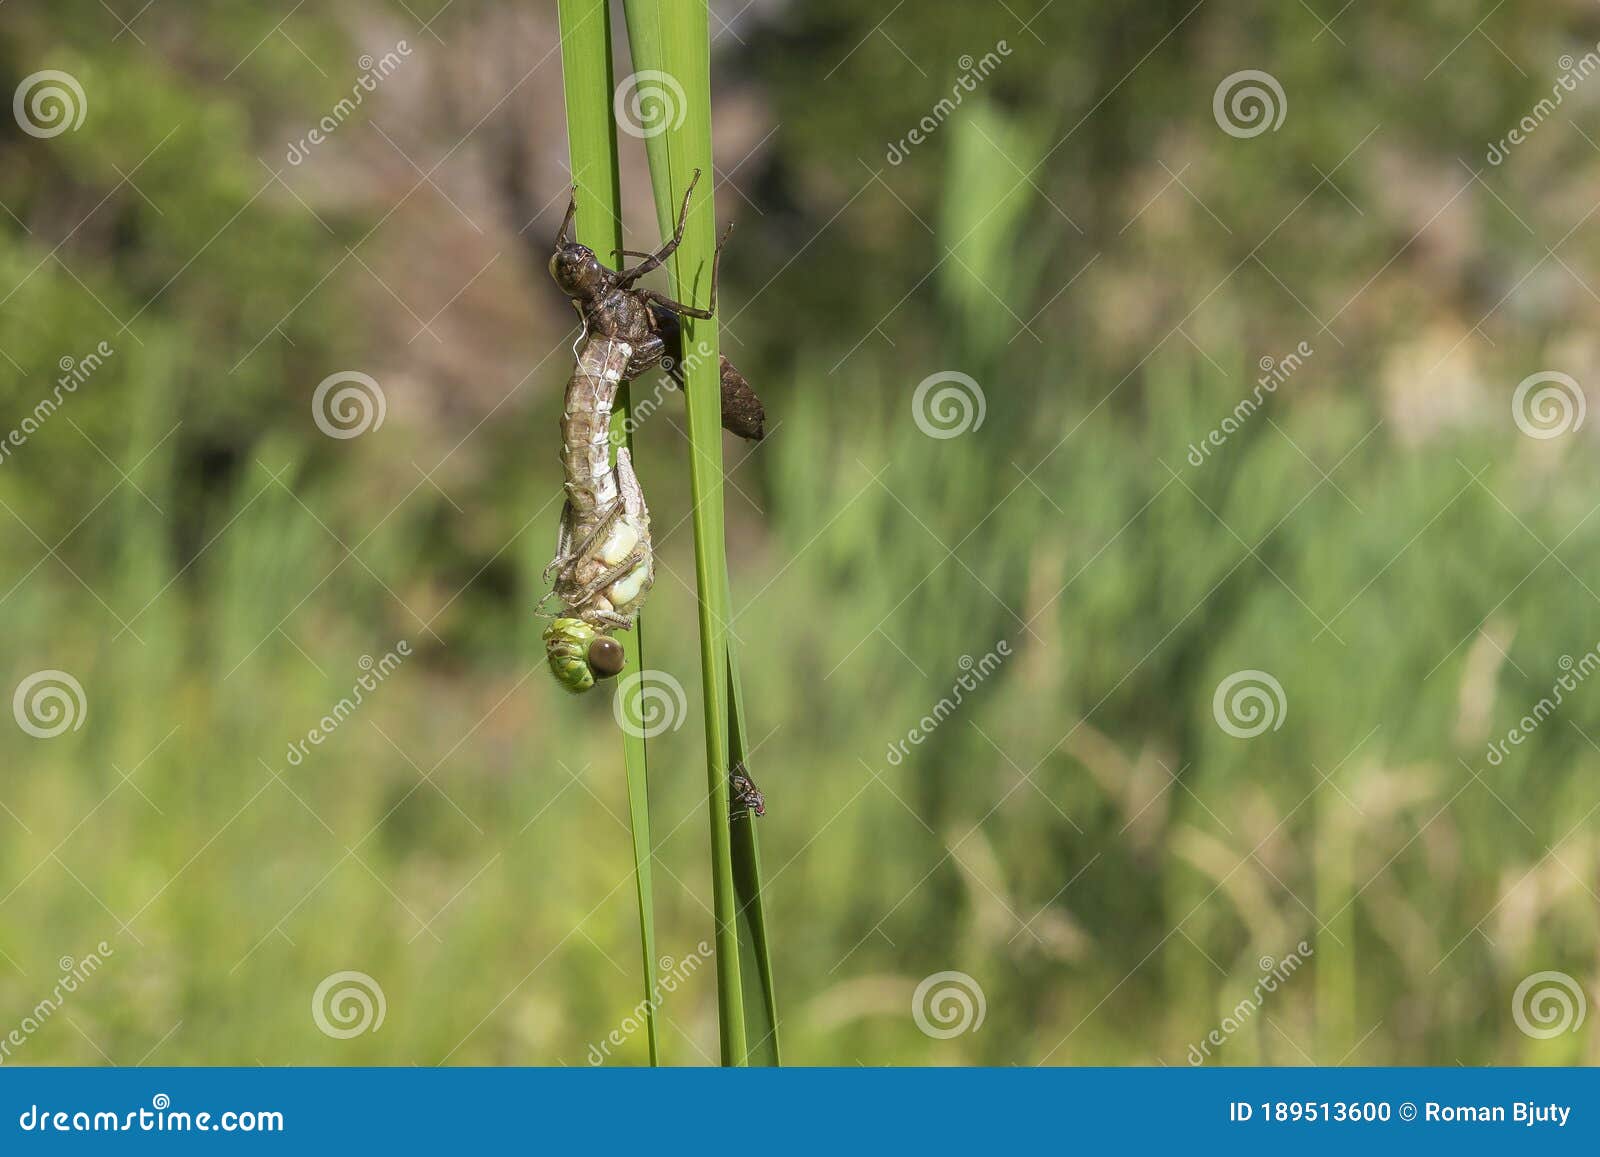 Dragonfly - Odonata on a Blade of Grass Hatches from a Pupa. in the ...